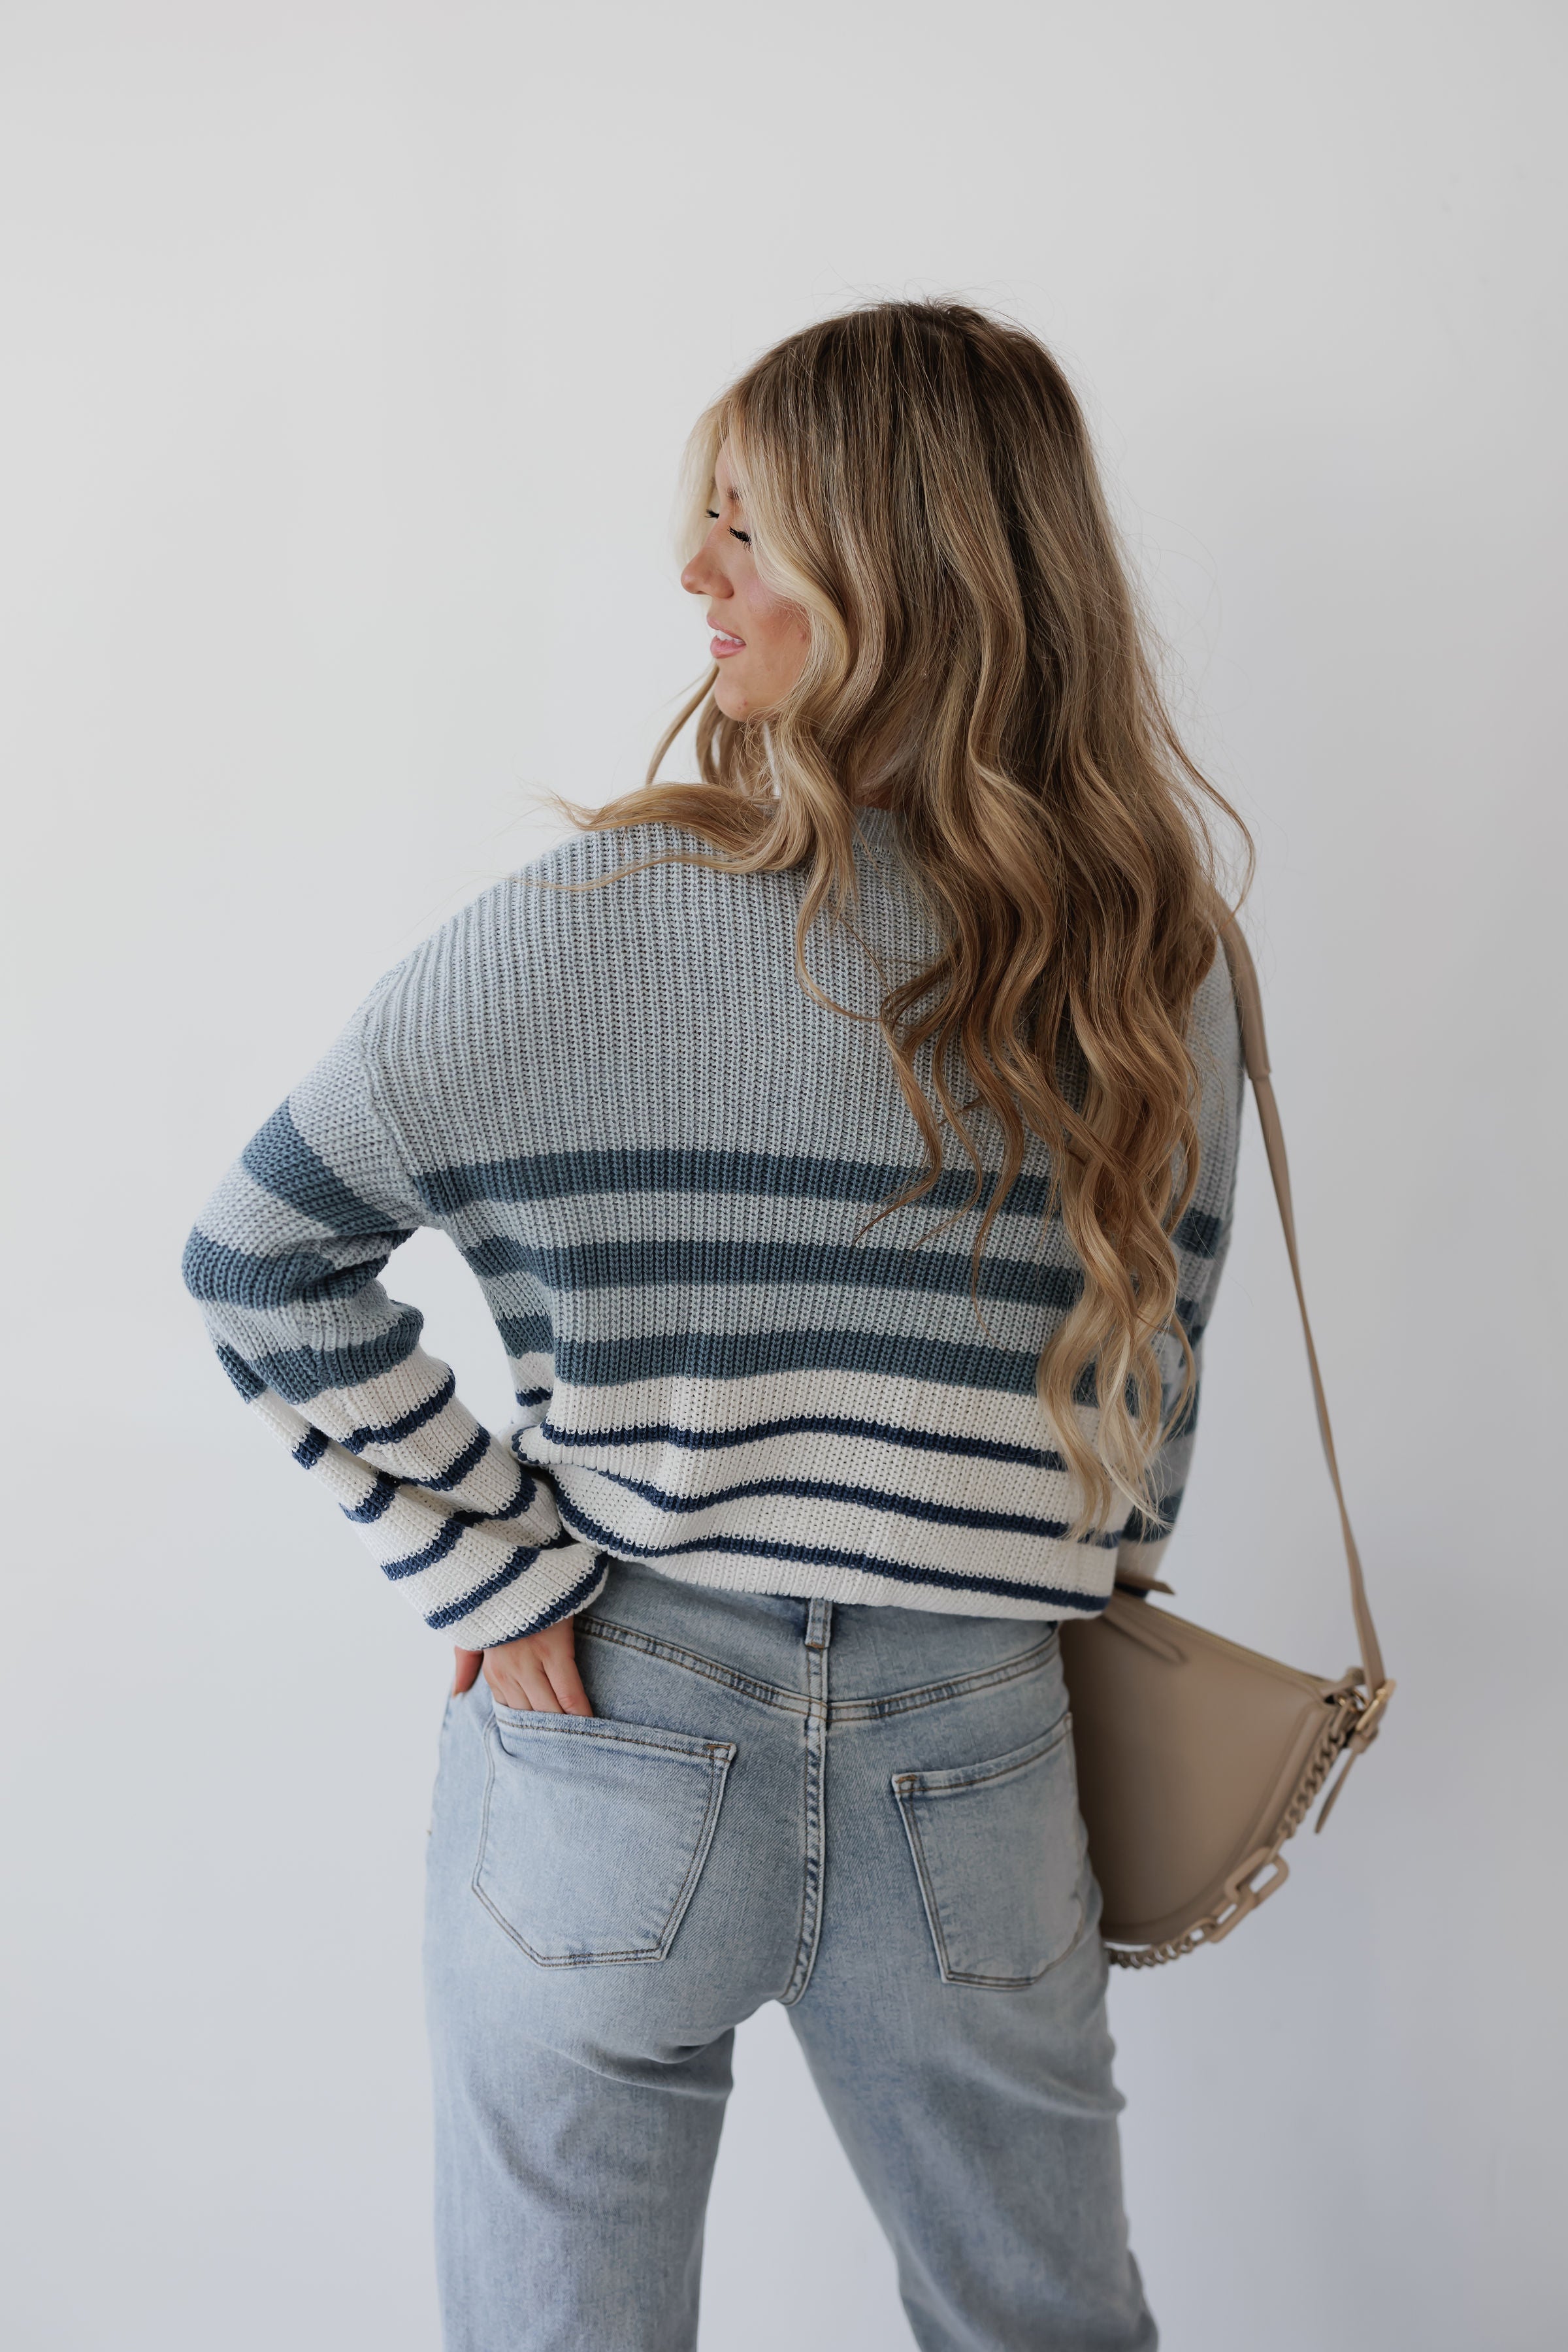 Winter Evening Striped Knit Sweater